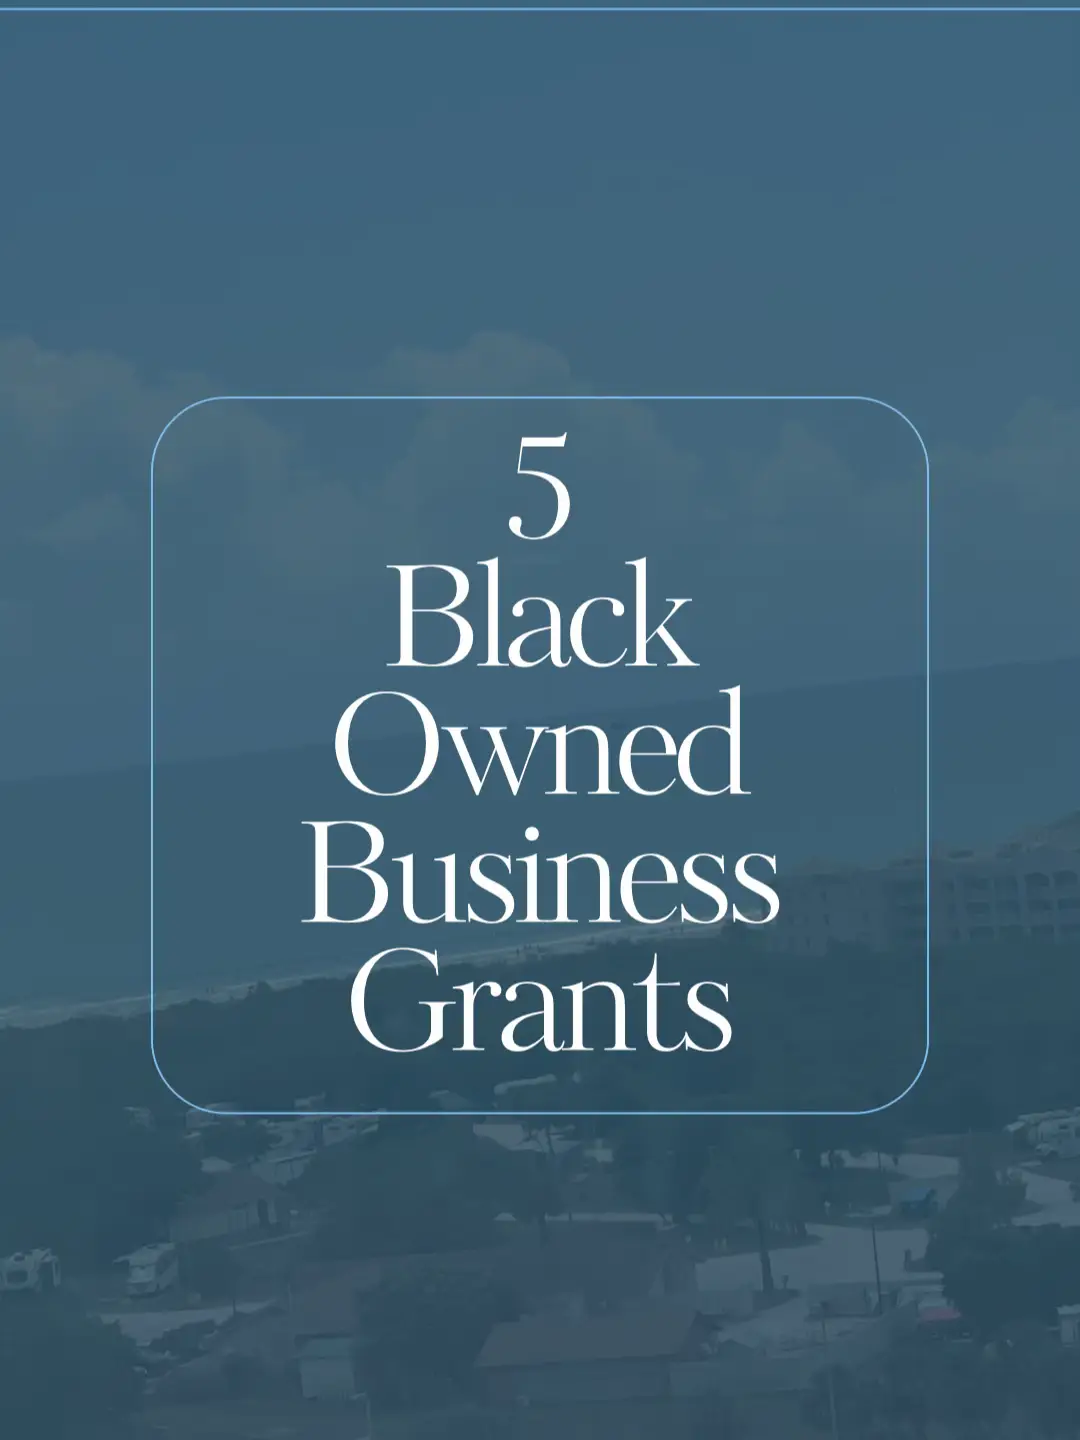 5 Black Owned Grants You Need ️ Video published by Momo Nicole 🍋 Lemon8